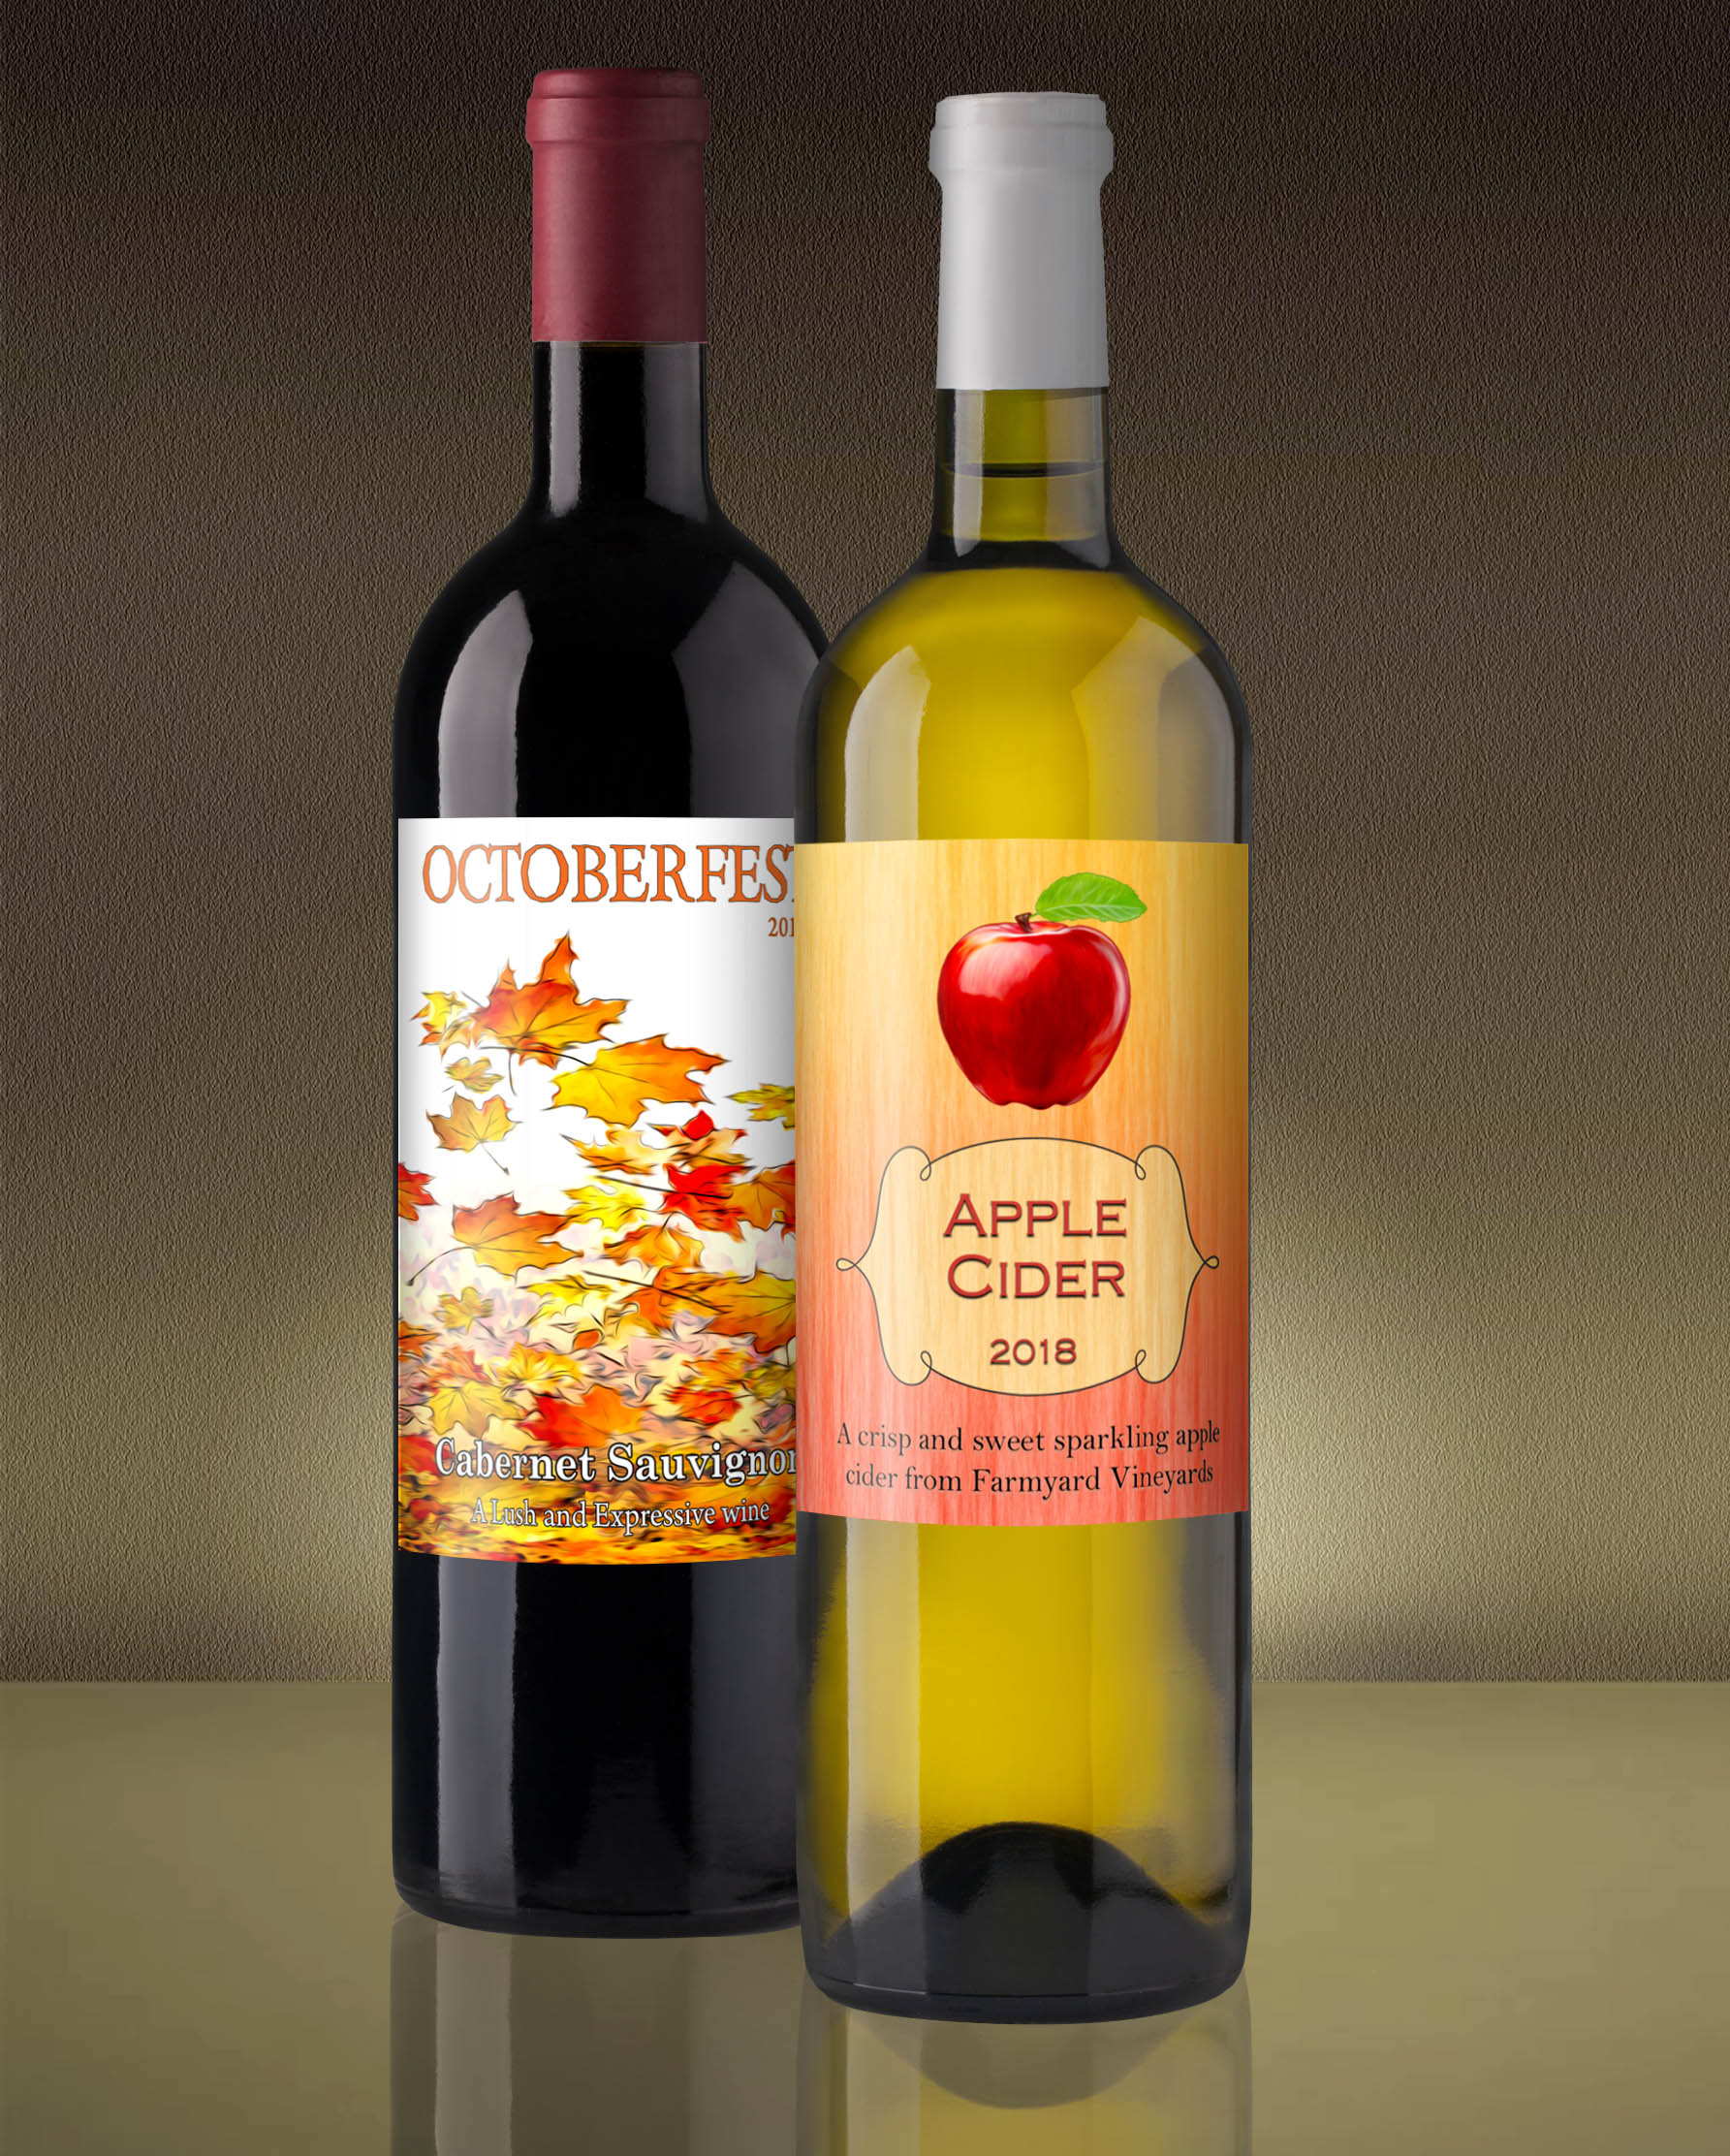 Autumn custom wine label templates with colorful fall leaves and apple cider